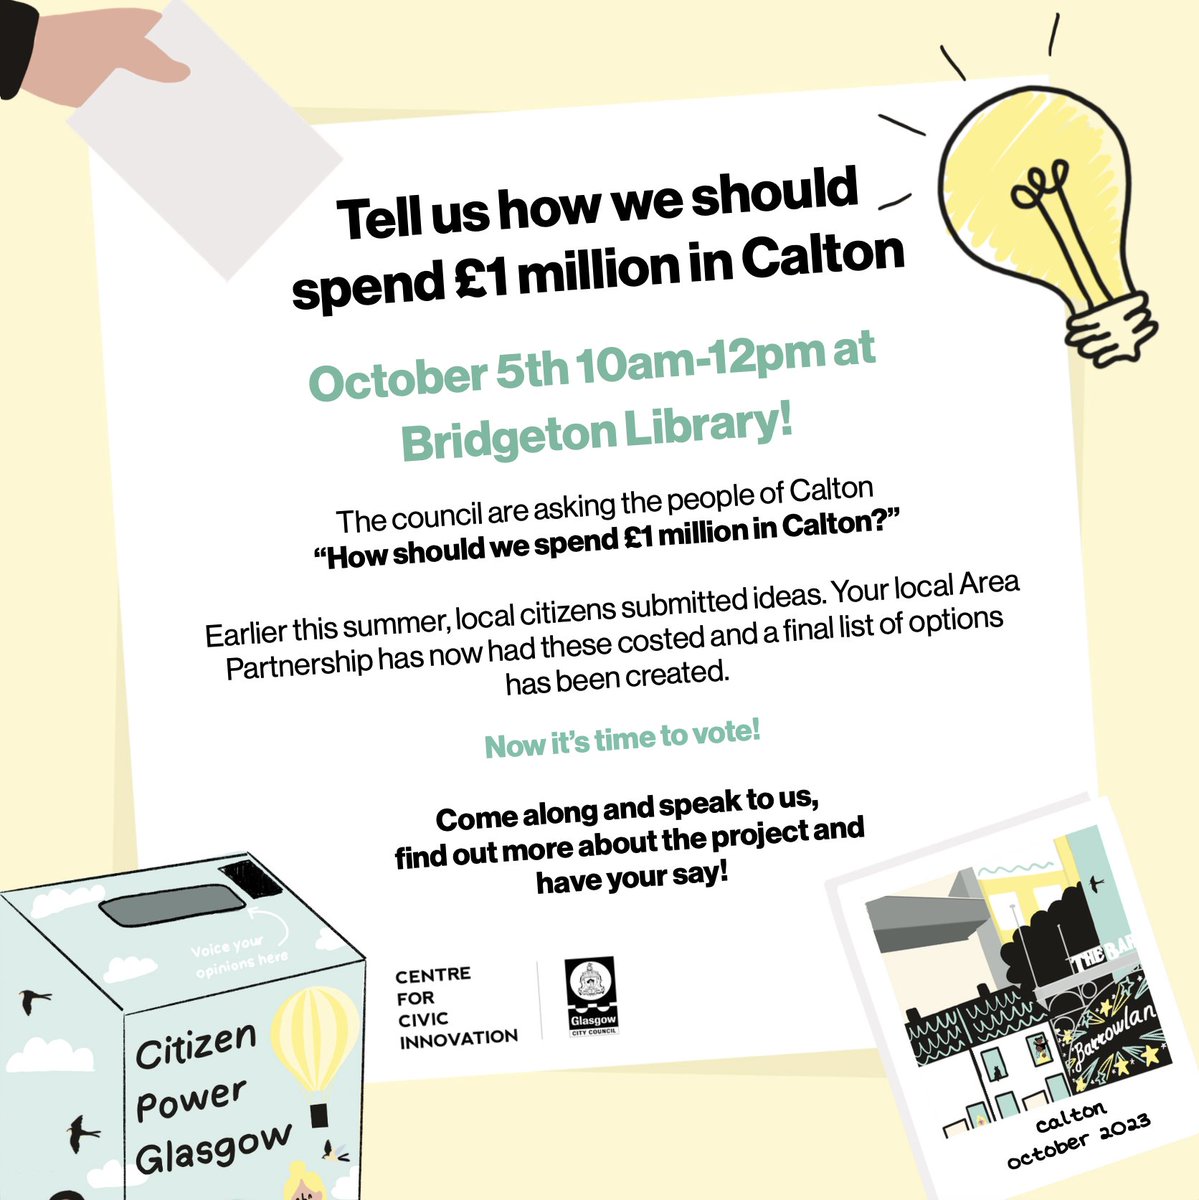 How should we spend £1 Million in Calton? There will be two pop-ups in the ward this week to share #YourCitizenVoice Come along to Parkhead Library on Wednesday OR Bridgeton Library on Thursday to have your say! OR VOTE ONLINE: cciglasgow.org/calton/ #Calton #NIIF #HaveYourSay